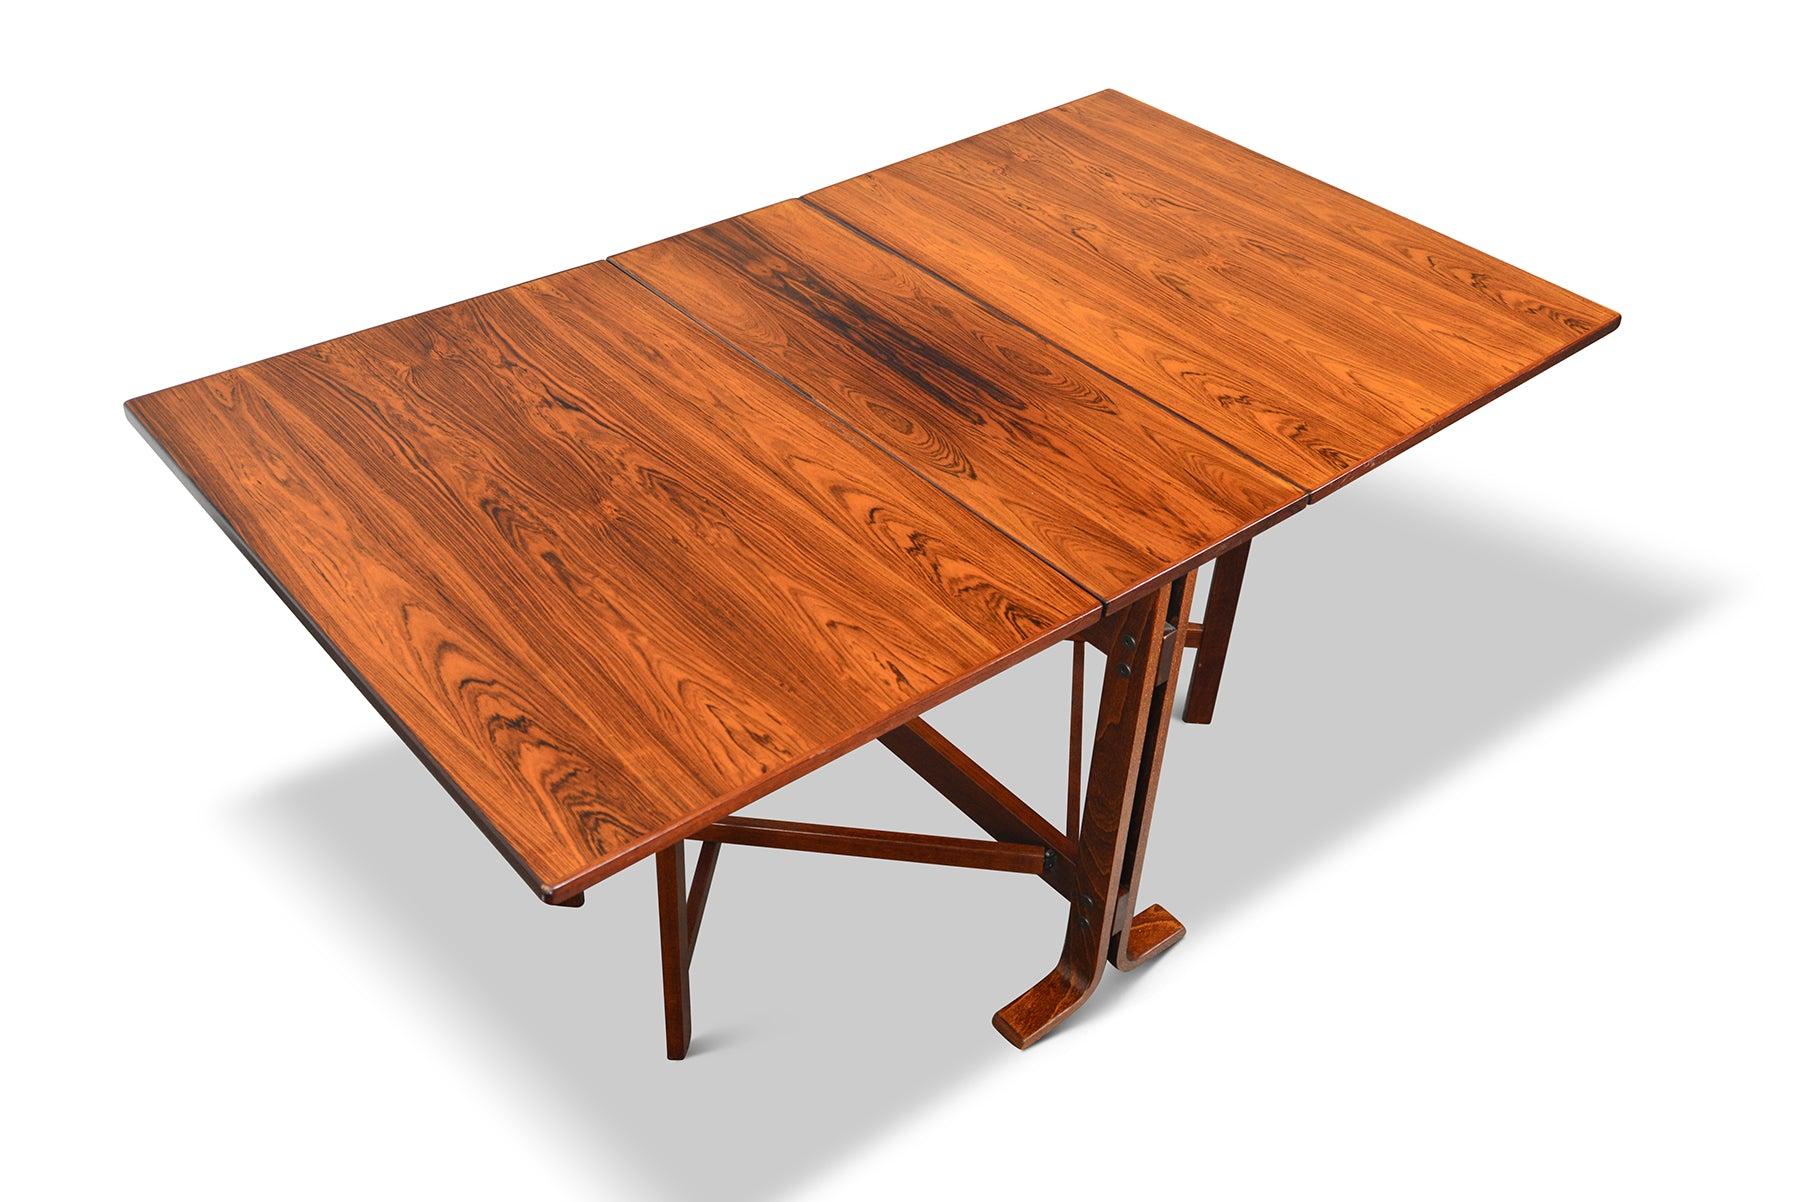 Drop Leaf Dining Table In Rosewood #1 1